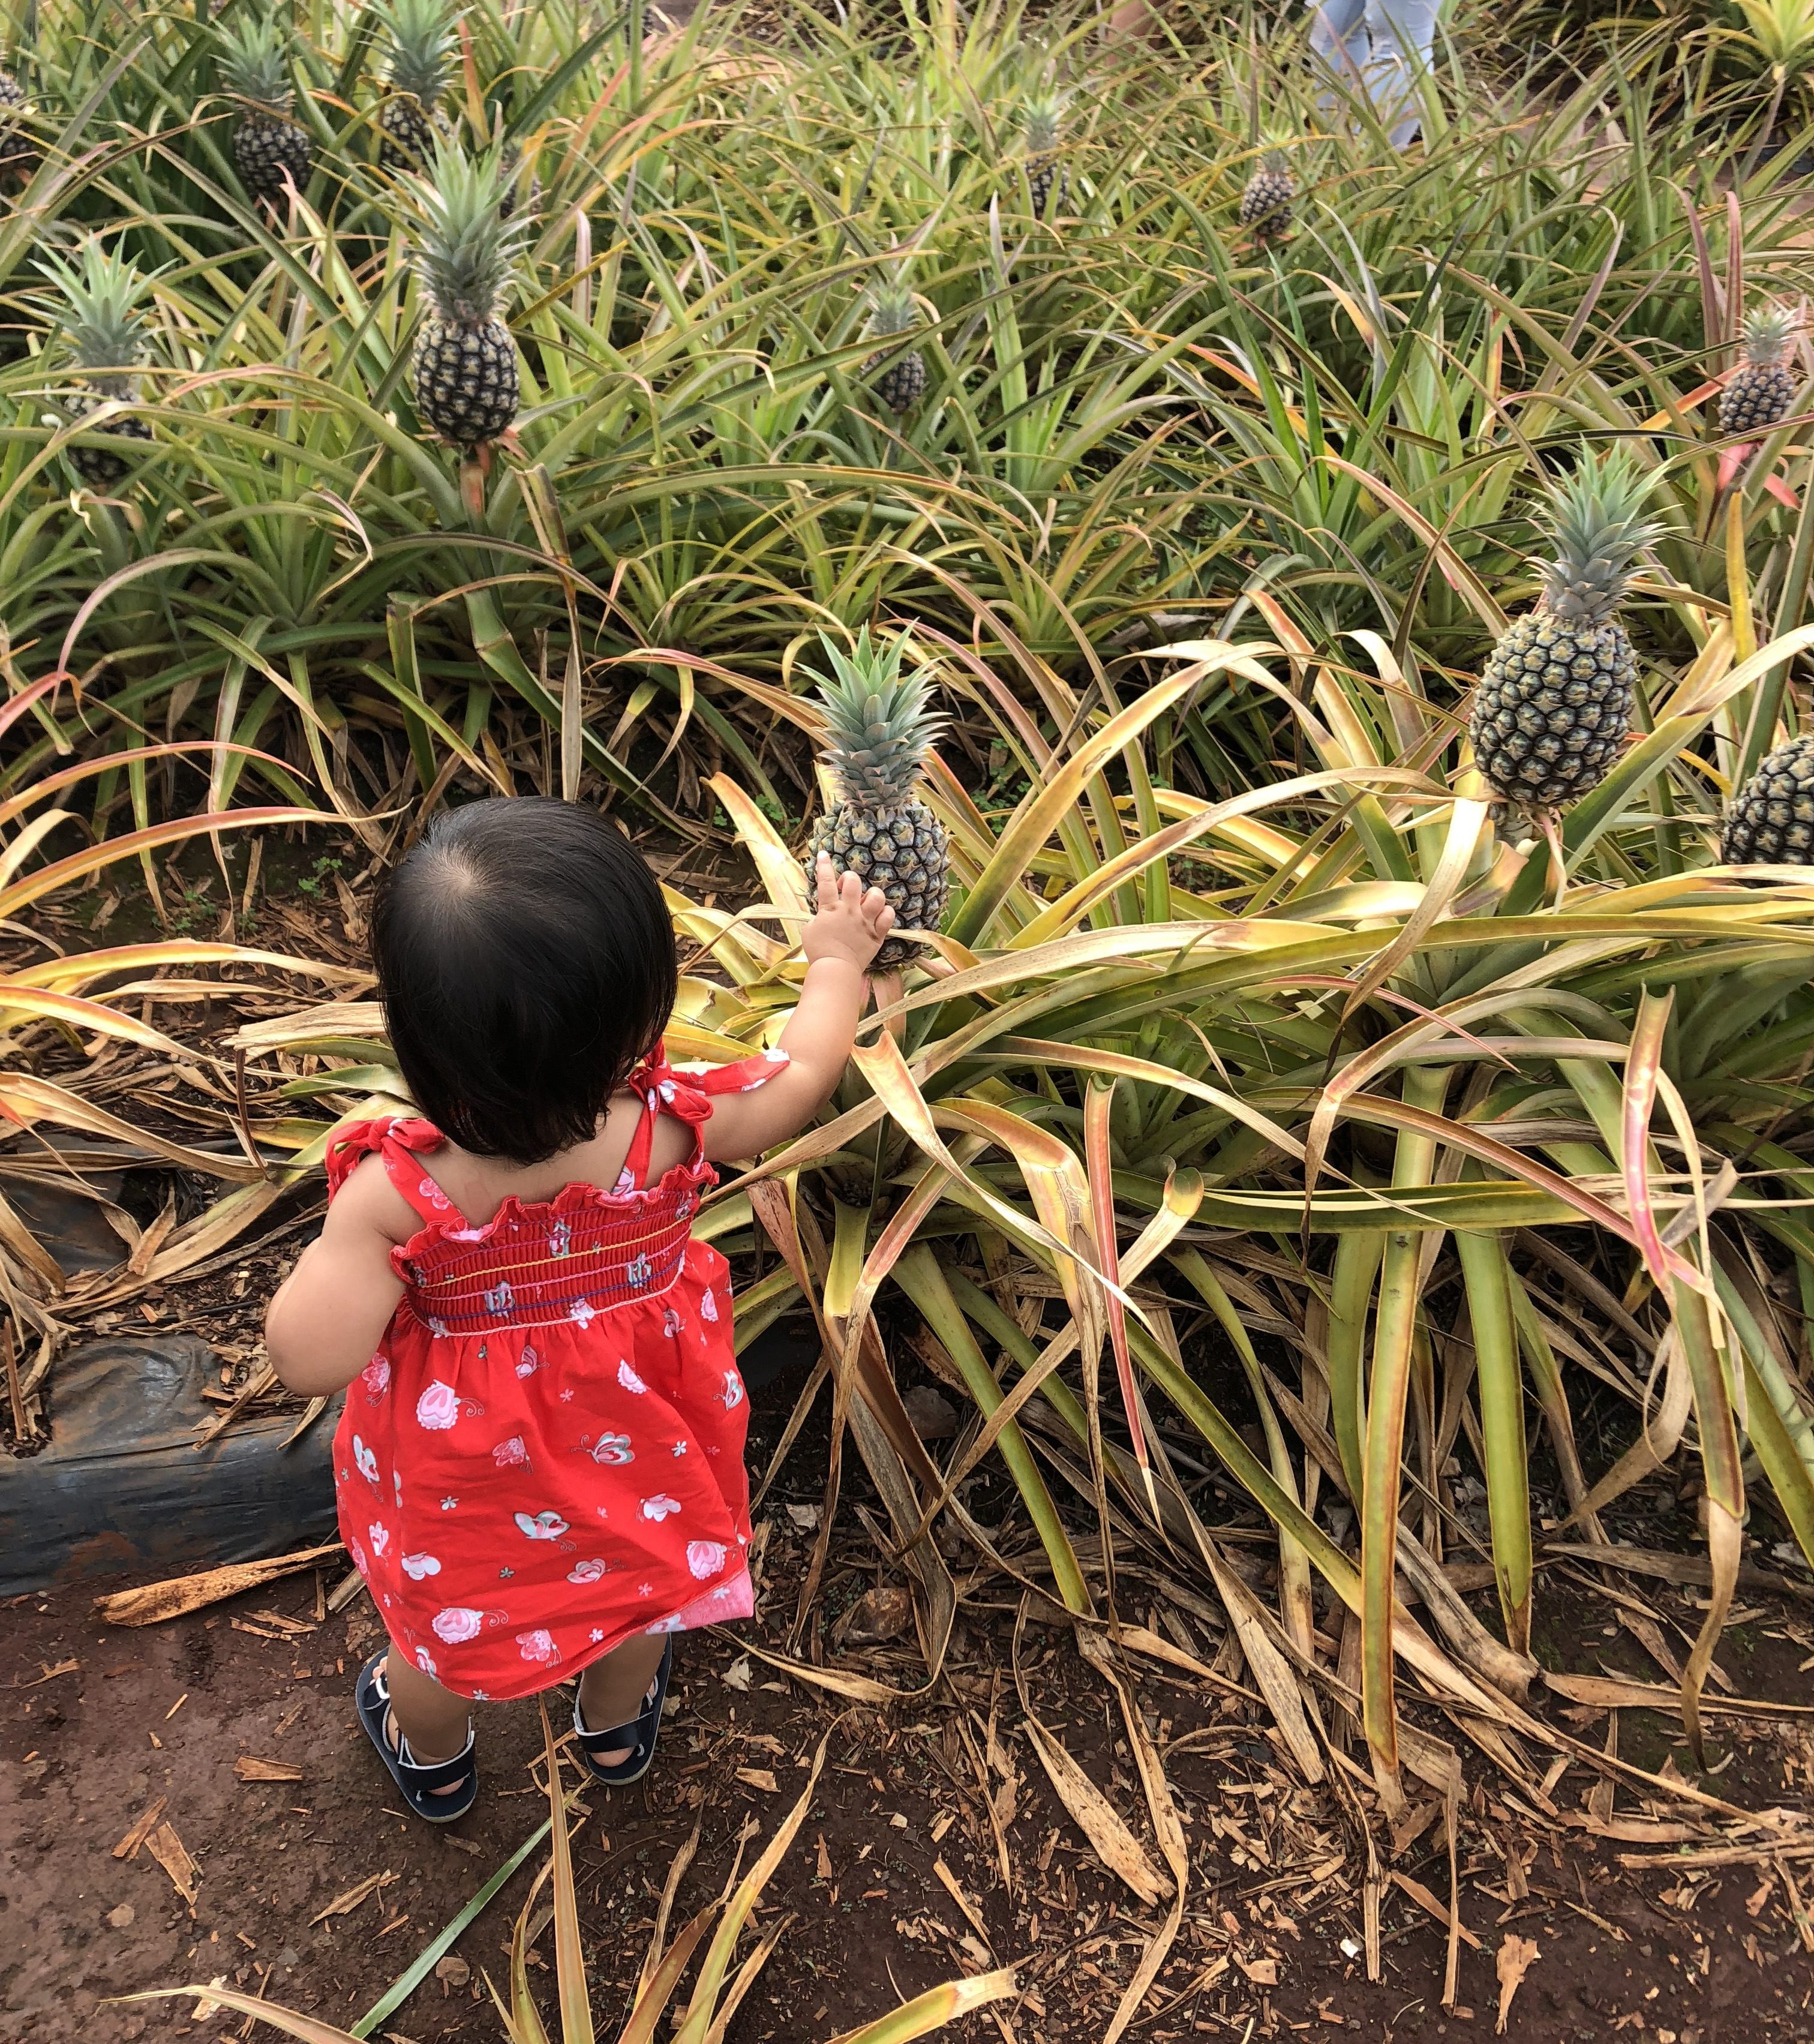 A child reaches out to a growing pineapple.